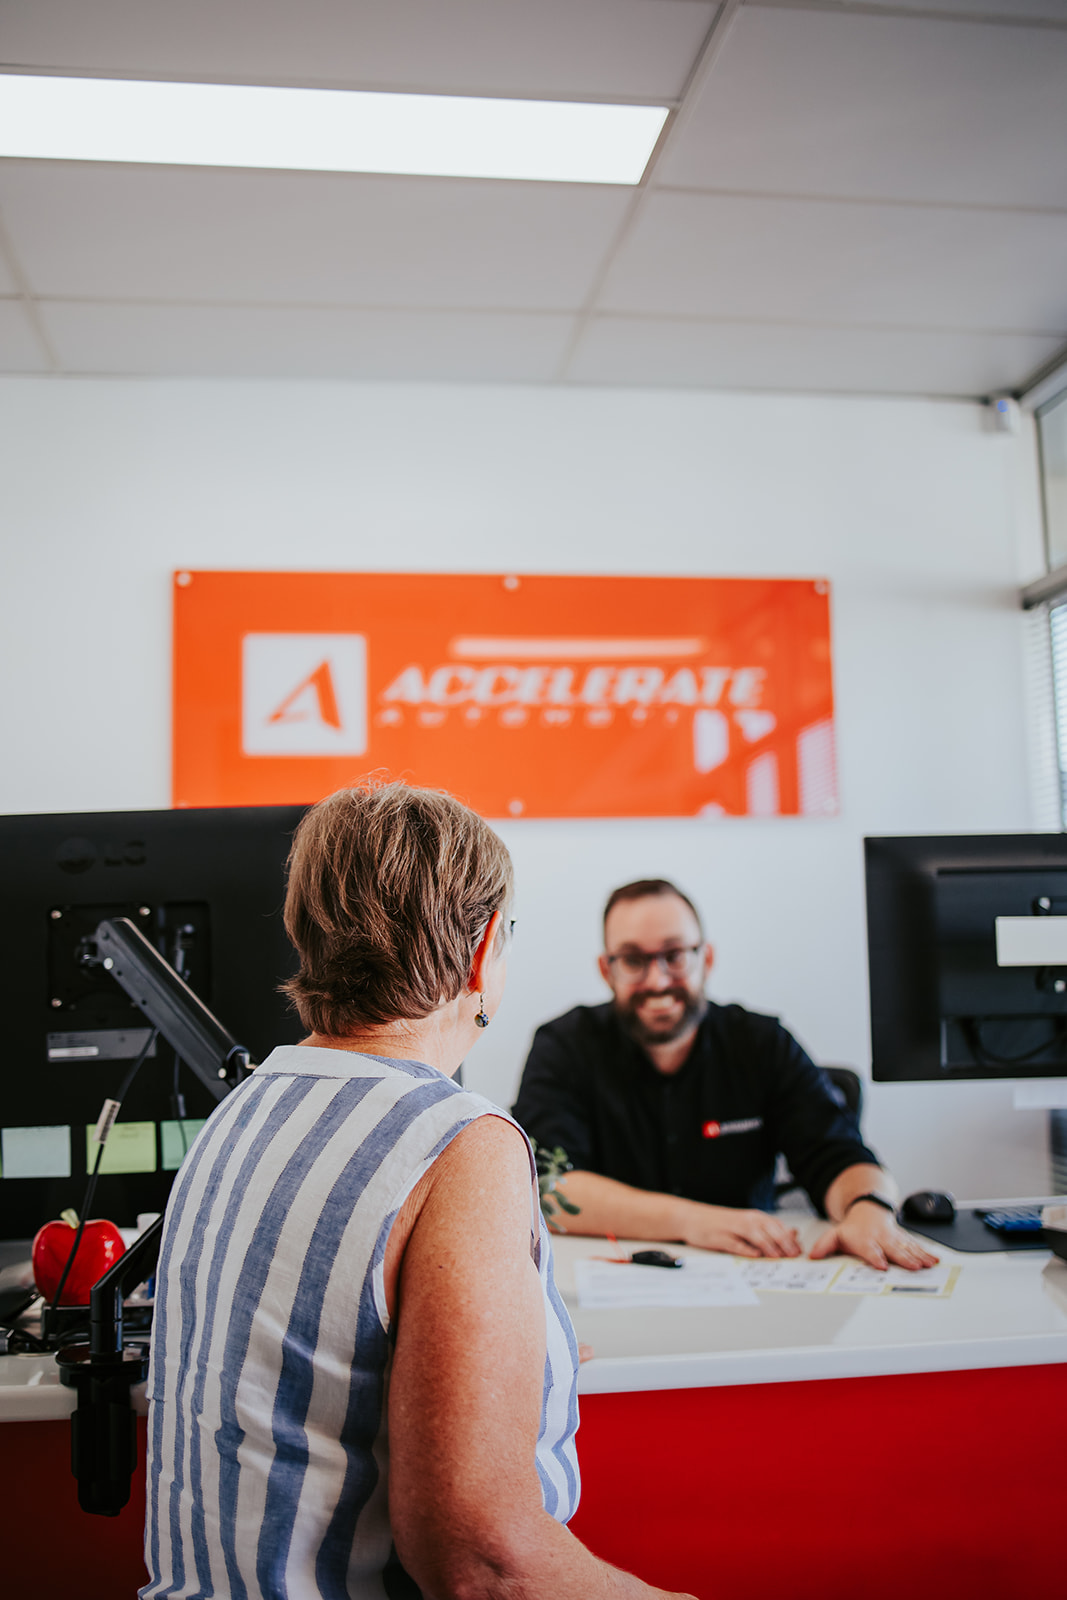 A person seated at a desk discusses with another who is standing, while a sign in the background reads "Accelerate," hinting at the new car service.